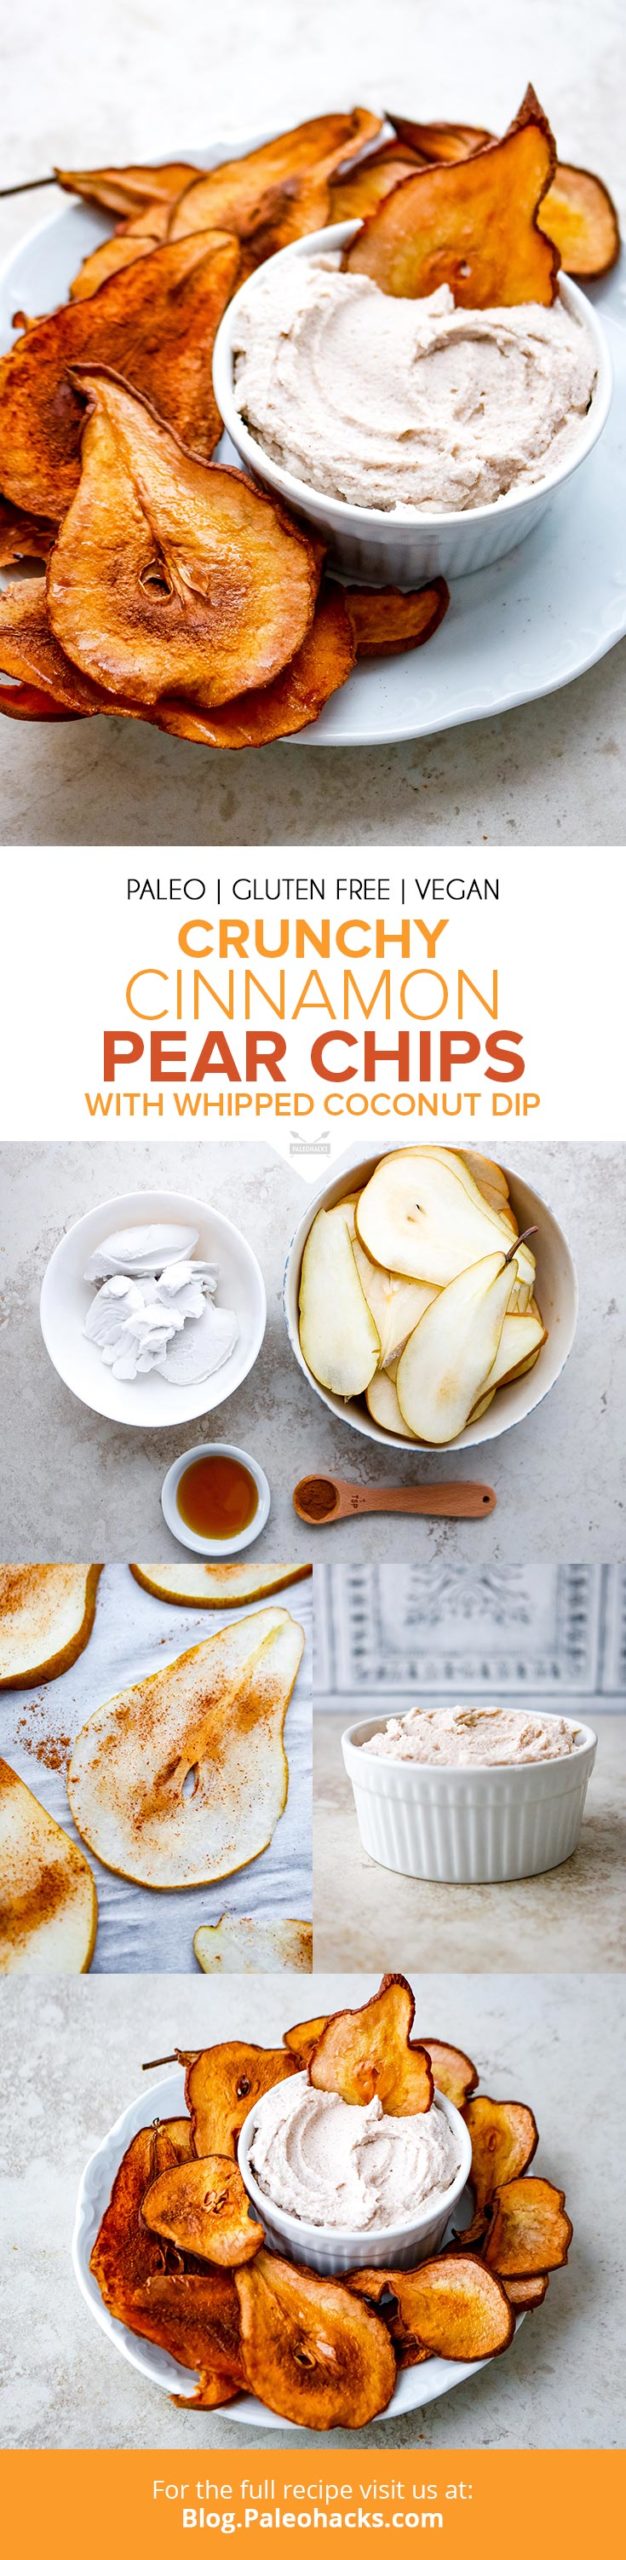 Crunchy Cinnamon Pear Chips with Whipped Coconut Dip 5